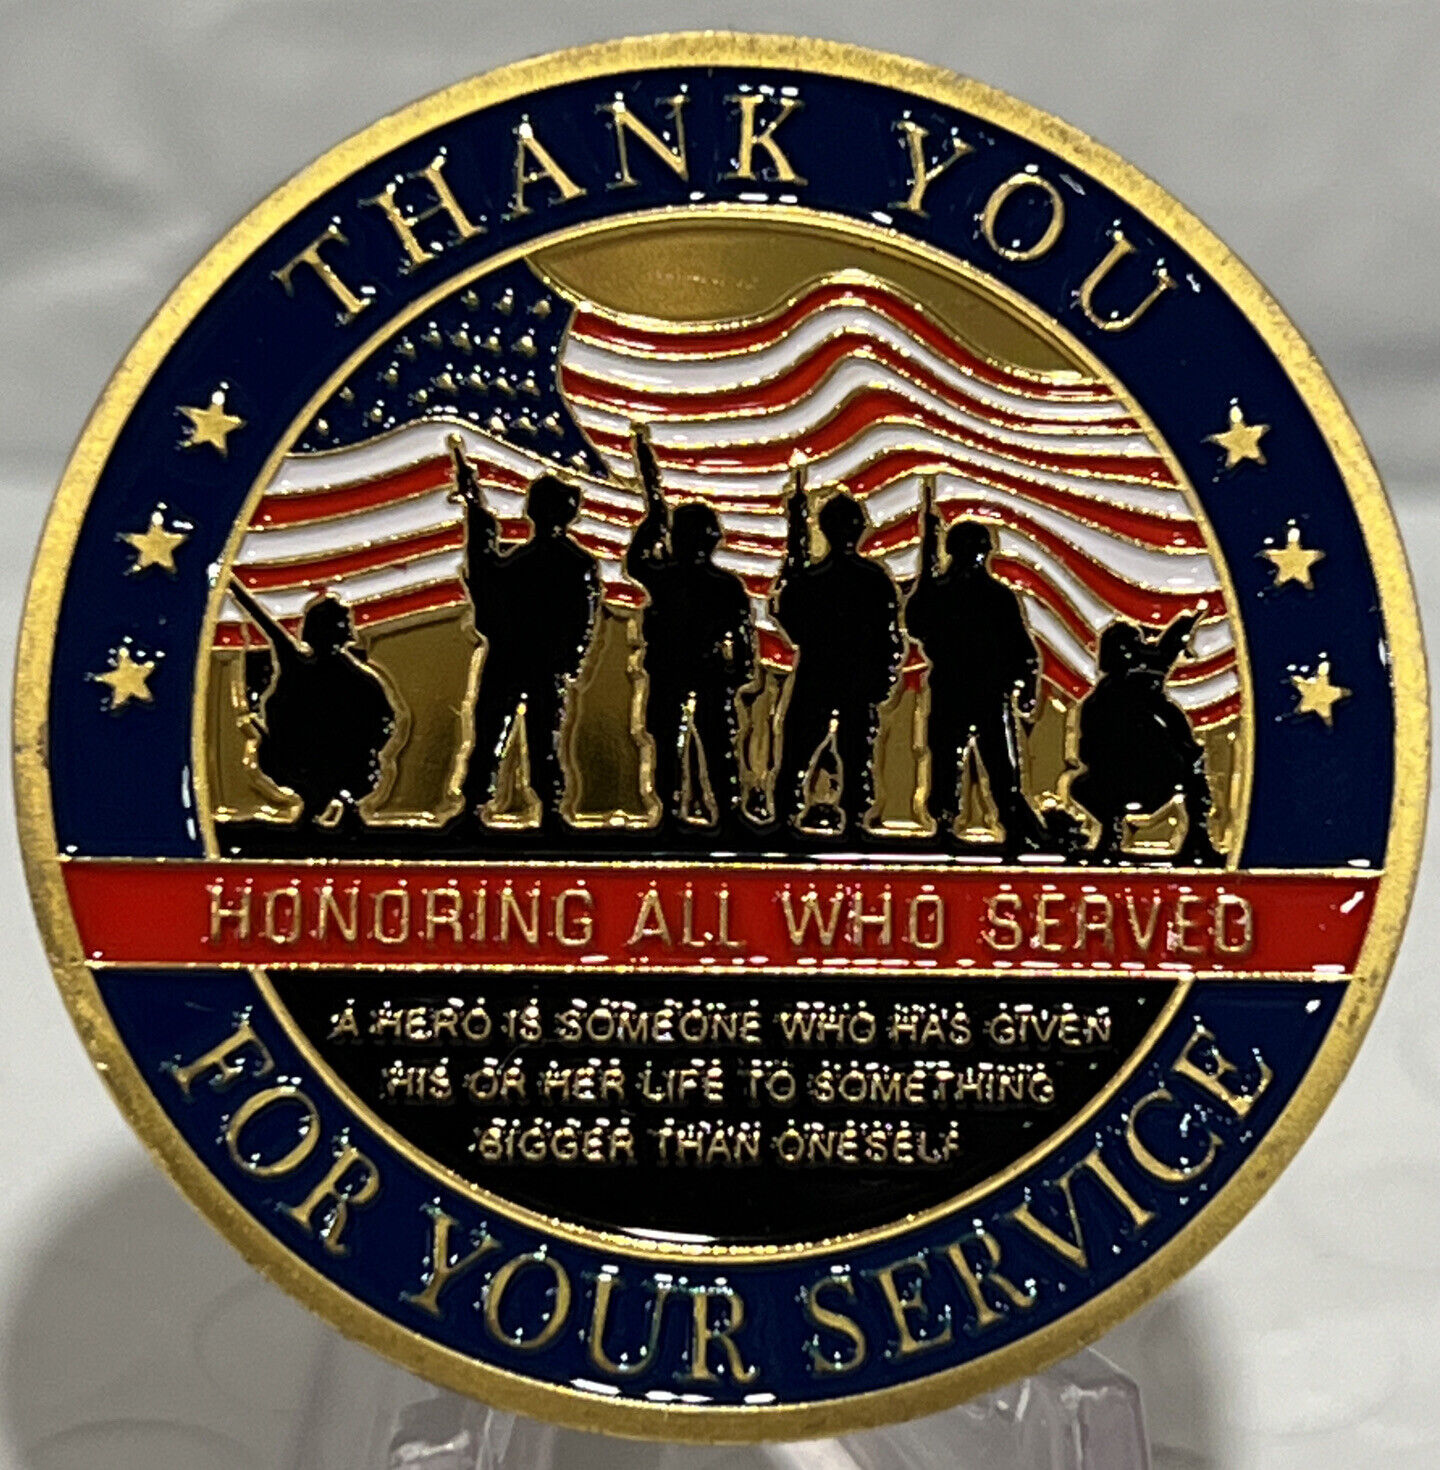 * “Thank You Veteran for Your Service”Military Challenge Coin Honoring Veterans